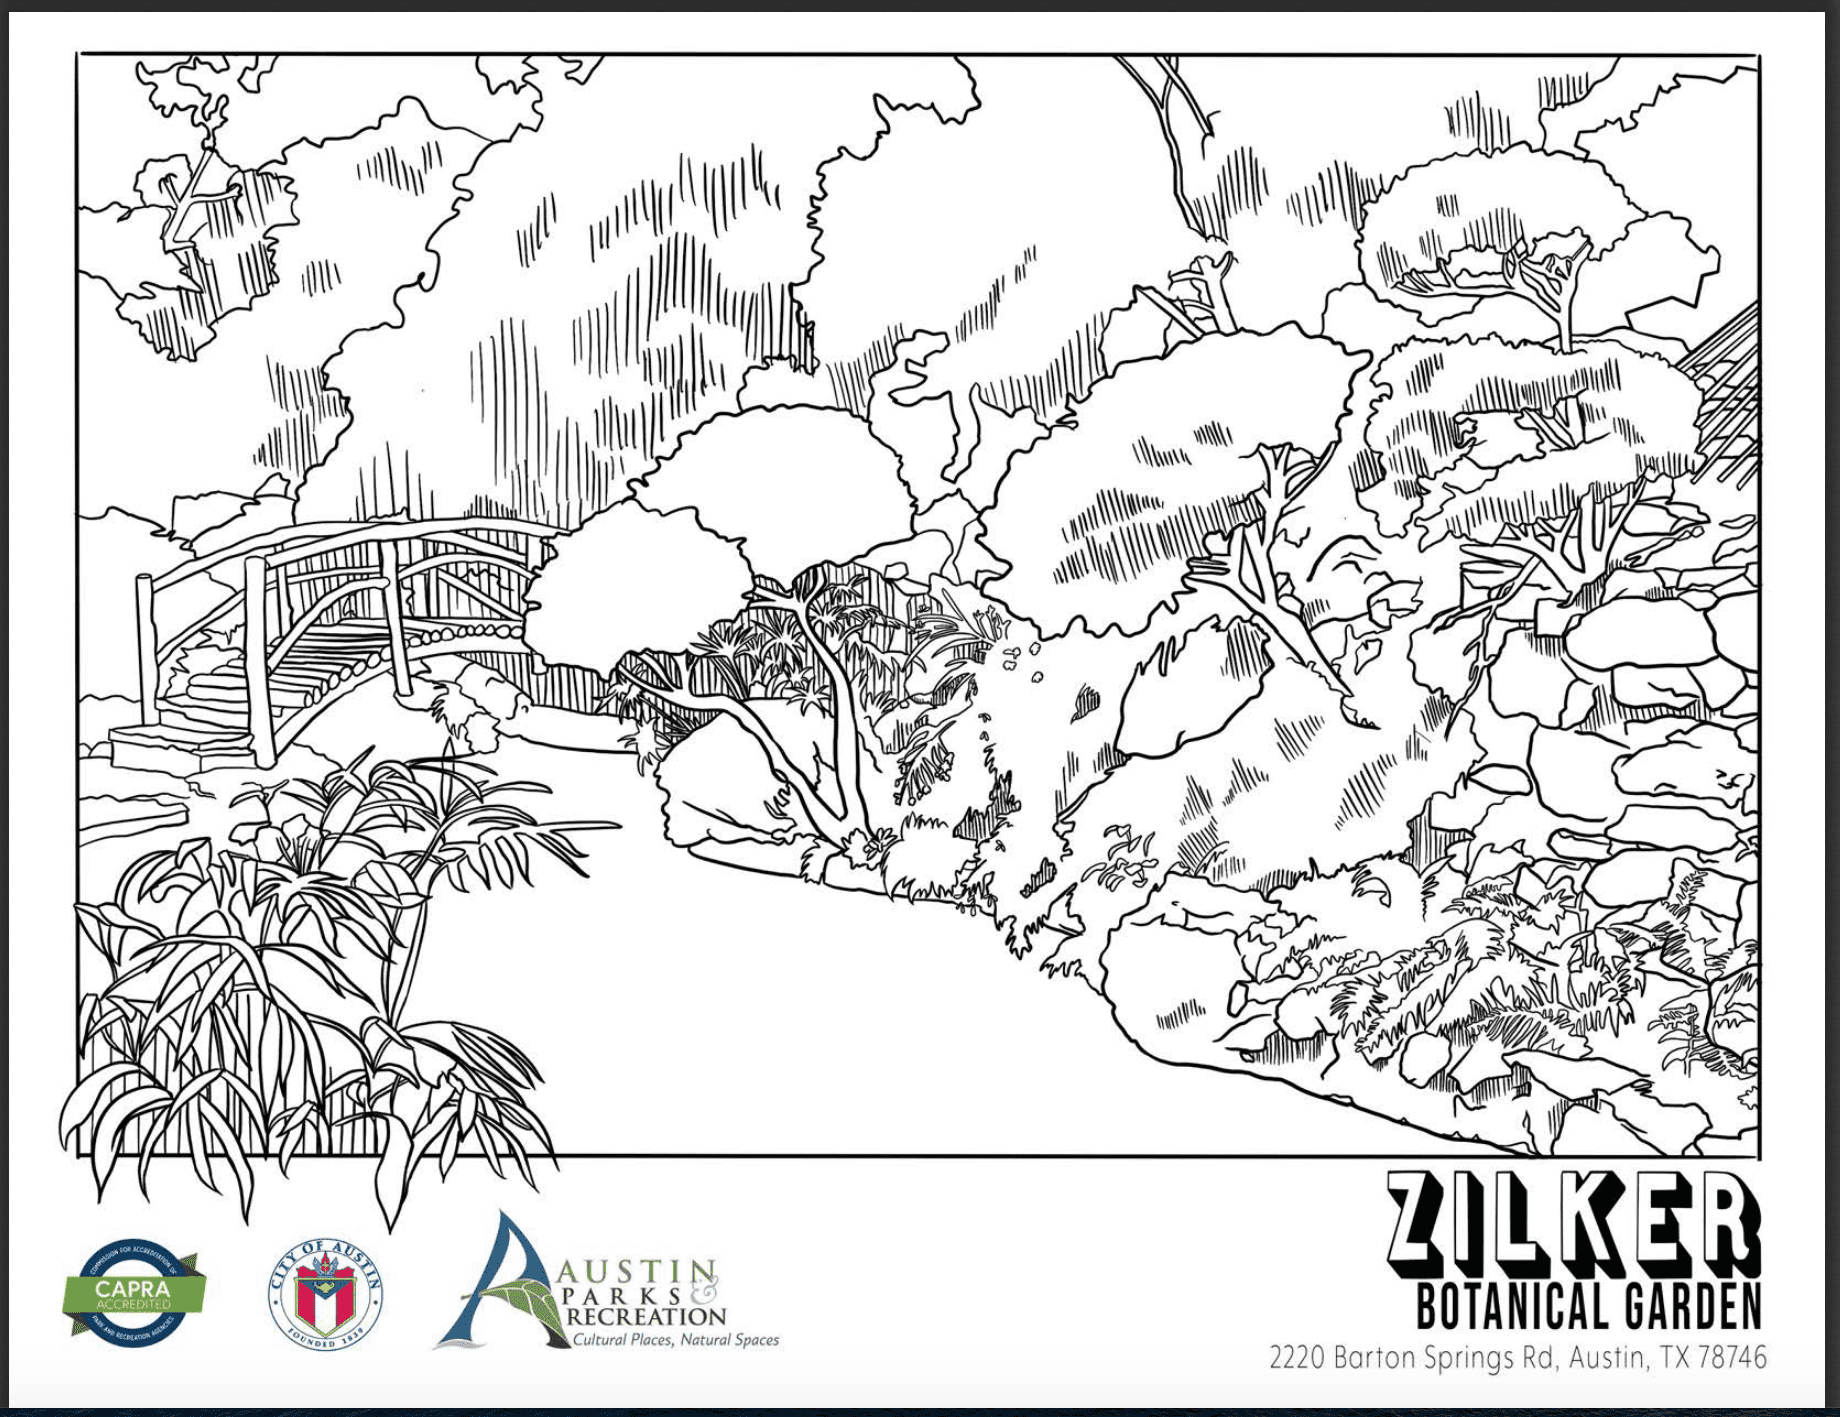 Free coloring pages of favorite austin parks â do family